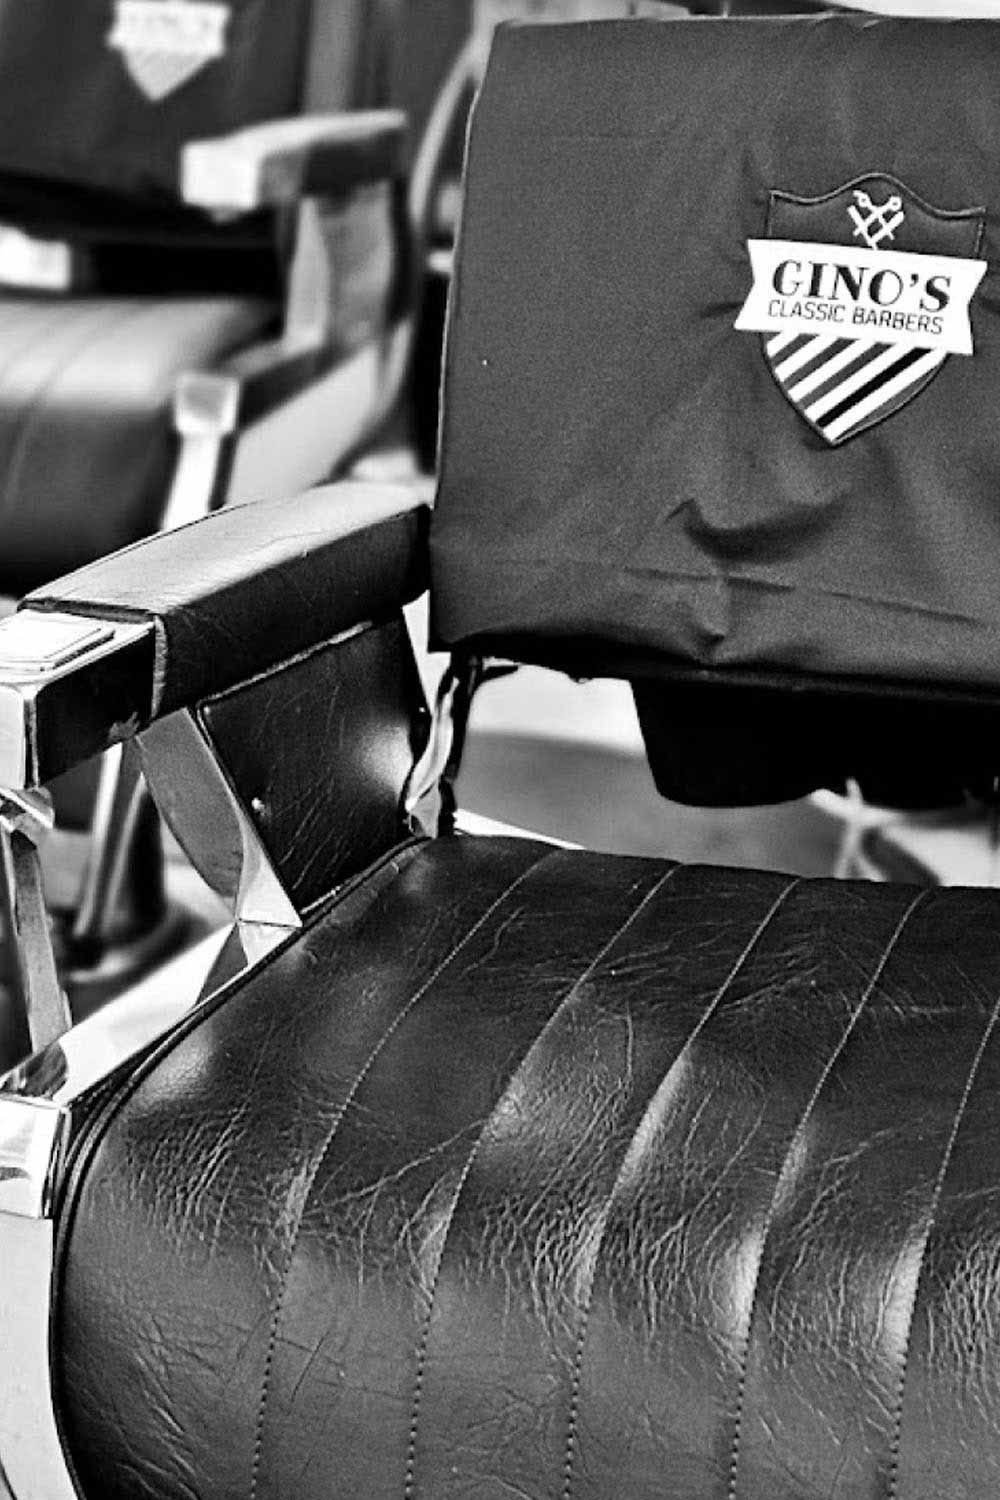 Ginos Classic Barbers 3